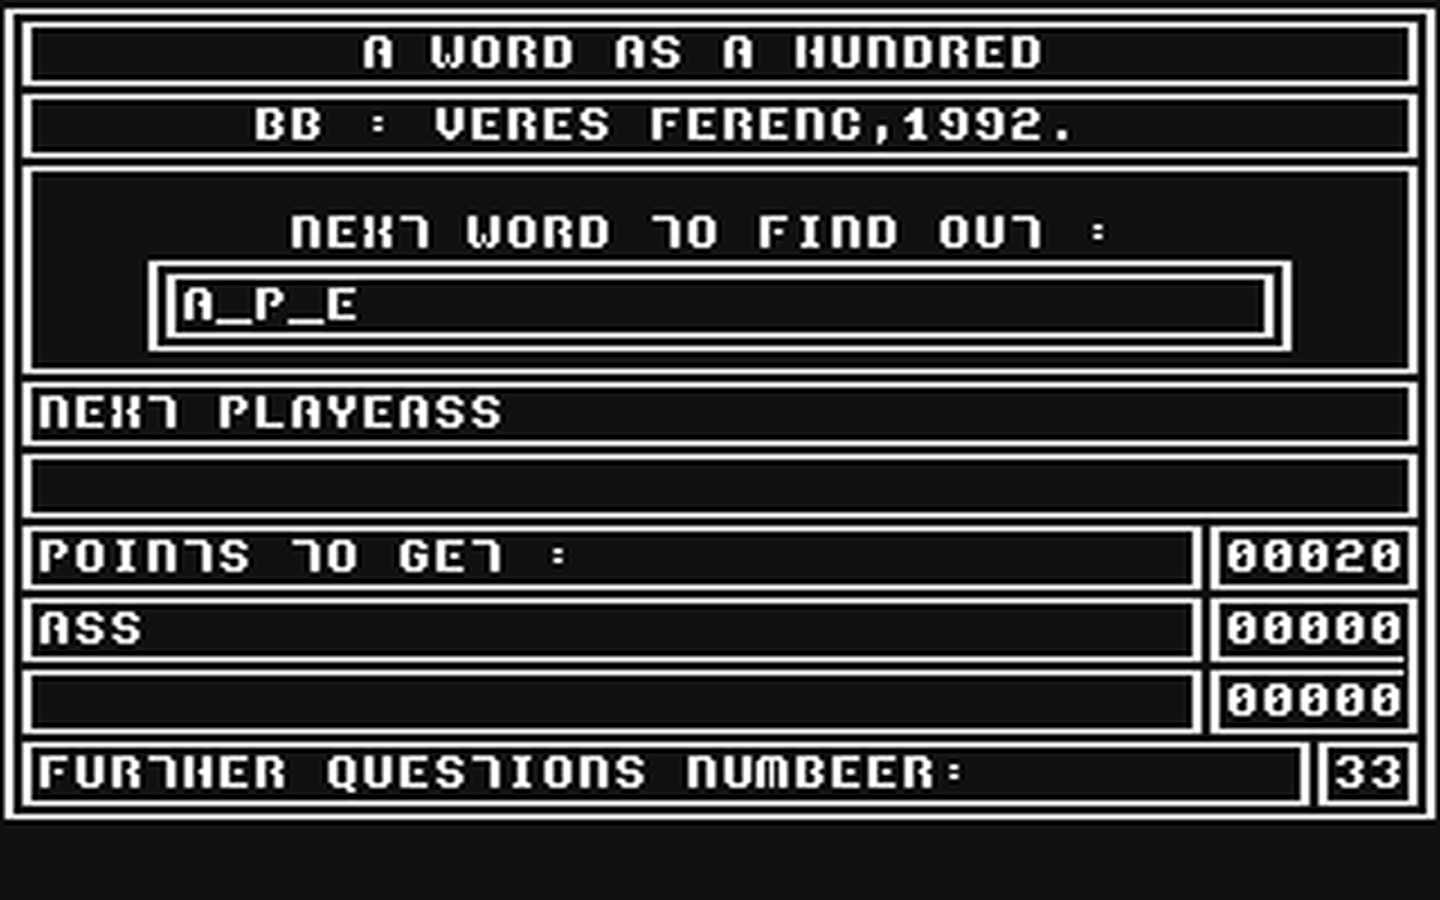 C64 GameBase Word_as_a_Hundred,_A (Public_Domain) 1992